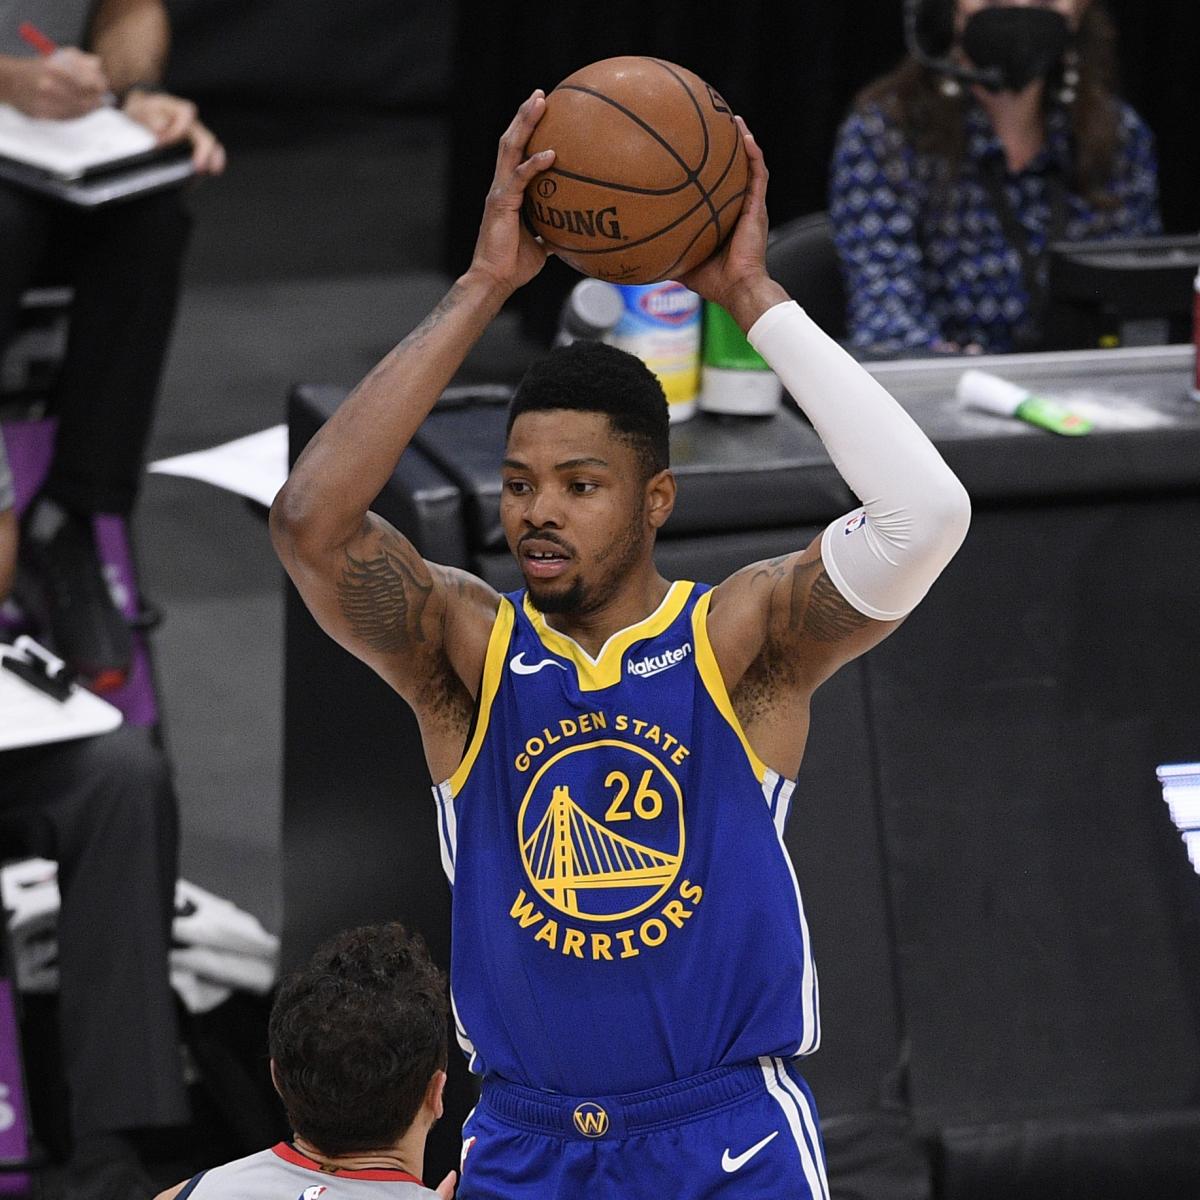 Kent Bazemore will be joining the Sacramento Kings